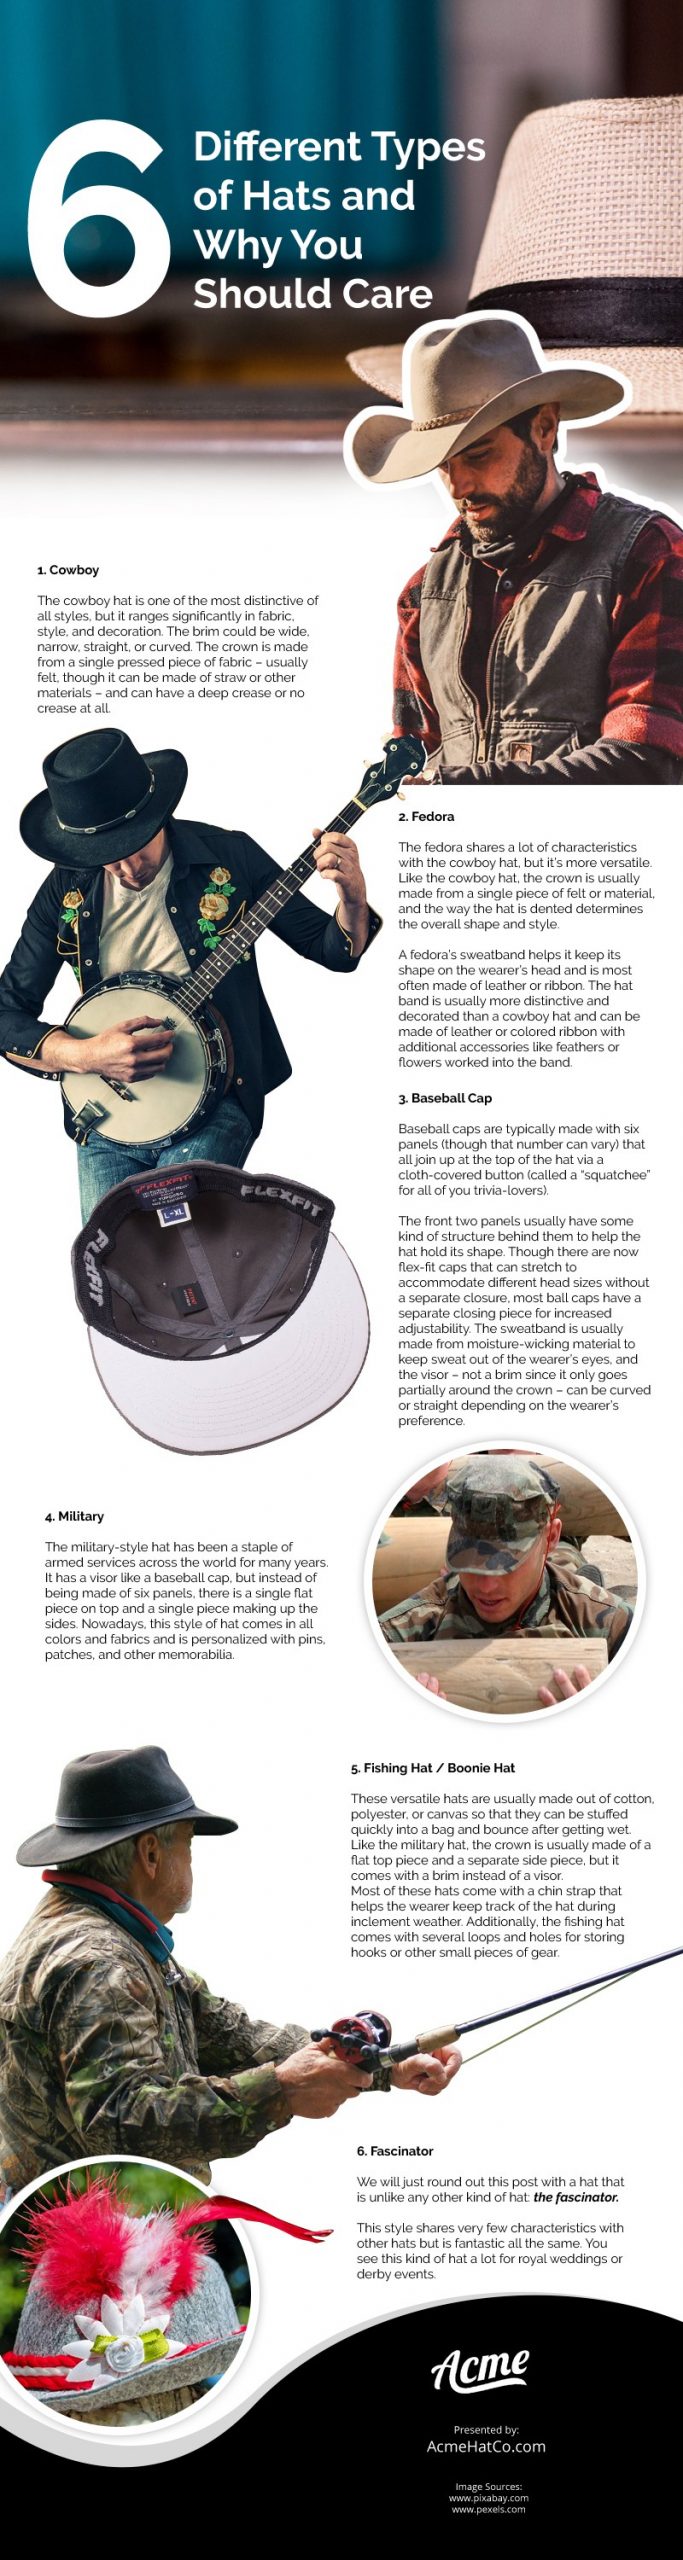 6 Different Types of Hats and Why You Should Care Infographic